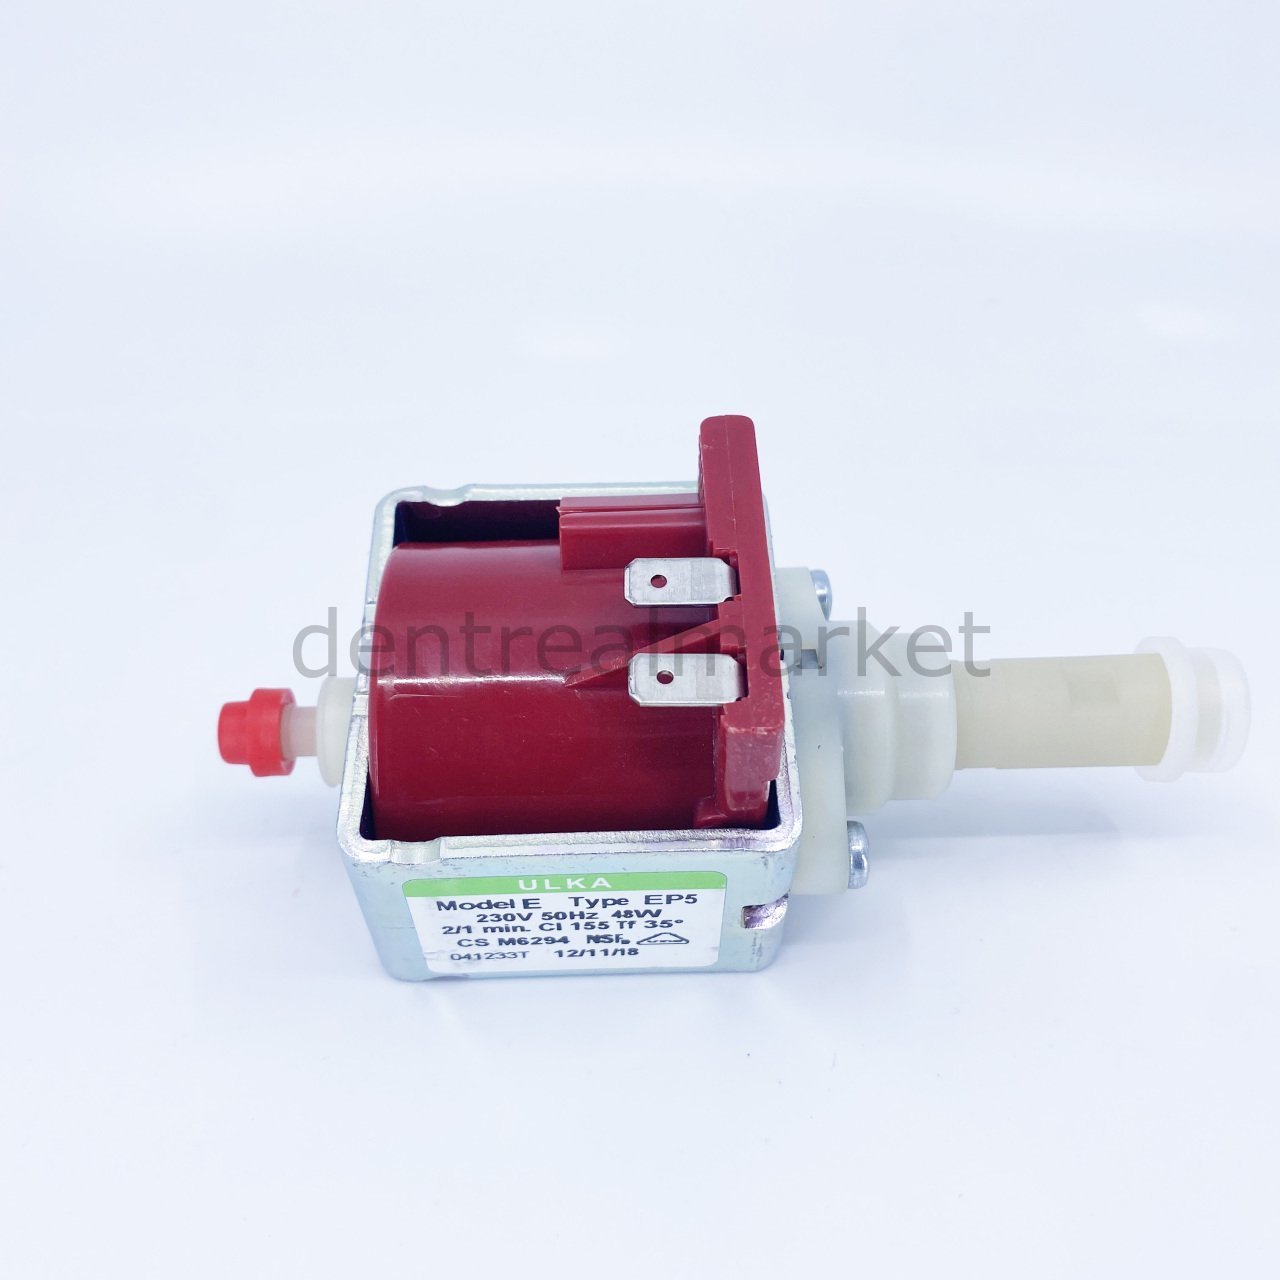 DentrealStore - New Dent Ulka Water Pump For Autoclave - M6294 - Type EP5